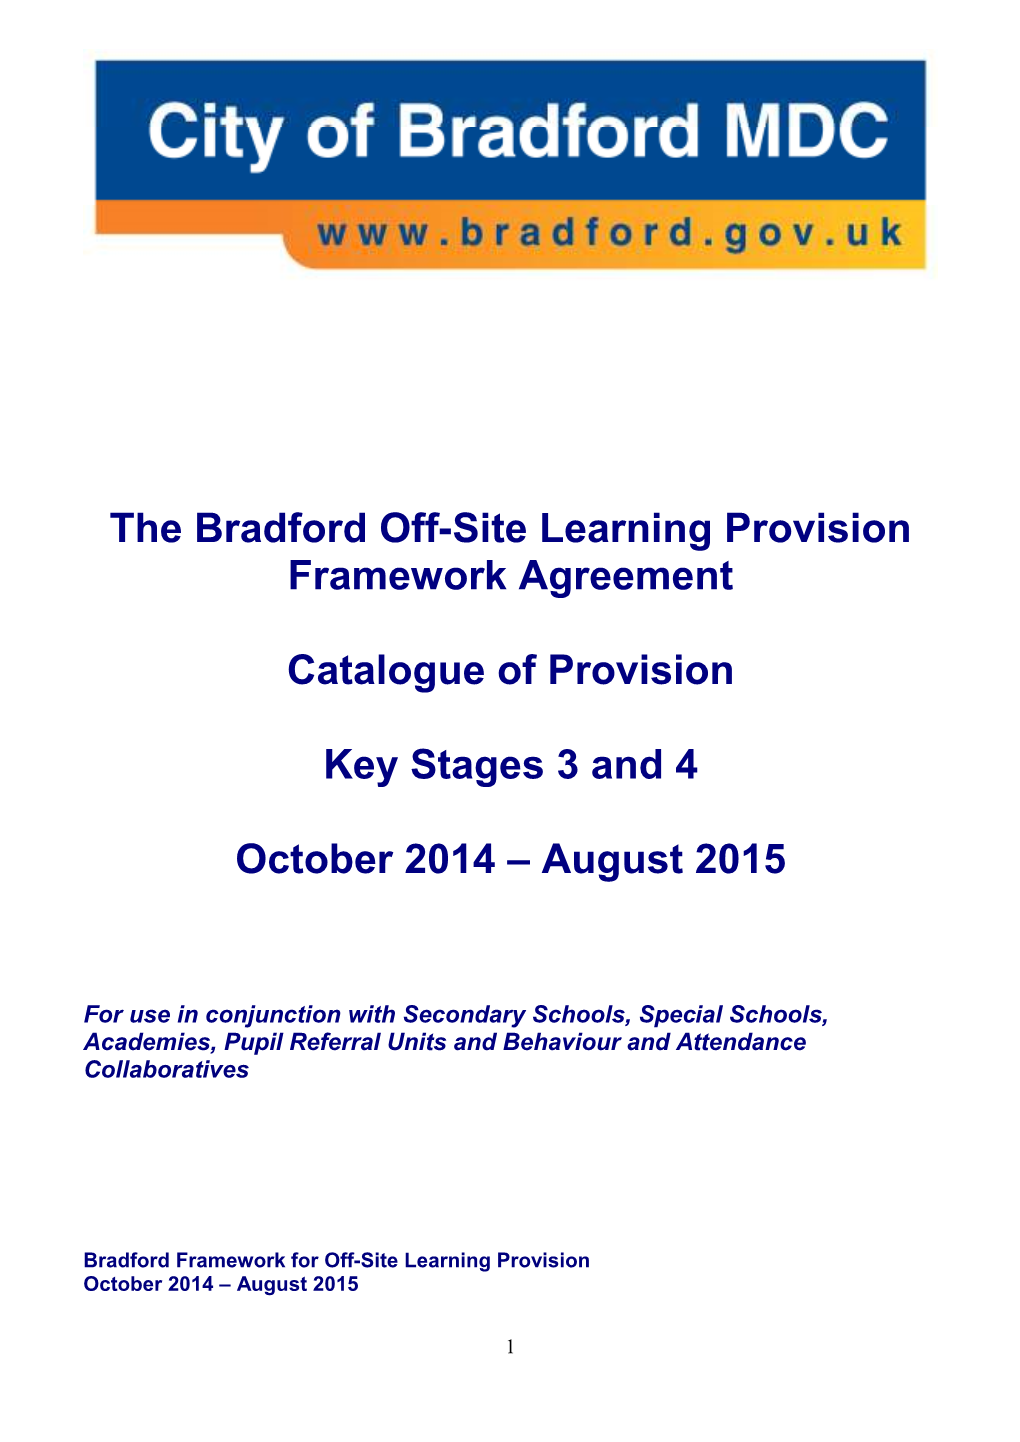 The Bradford Off-Site Learning Provision Framework Agreement